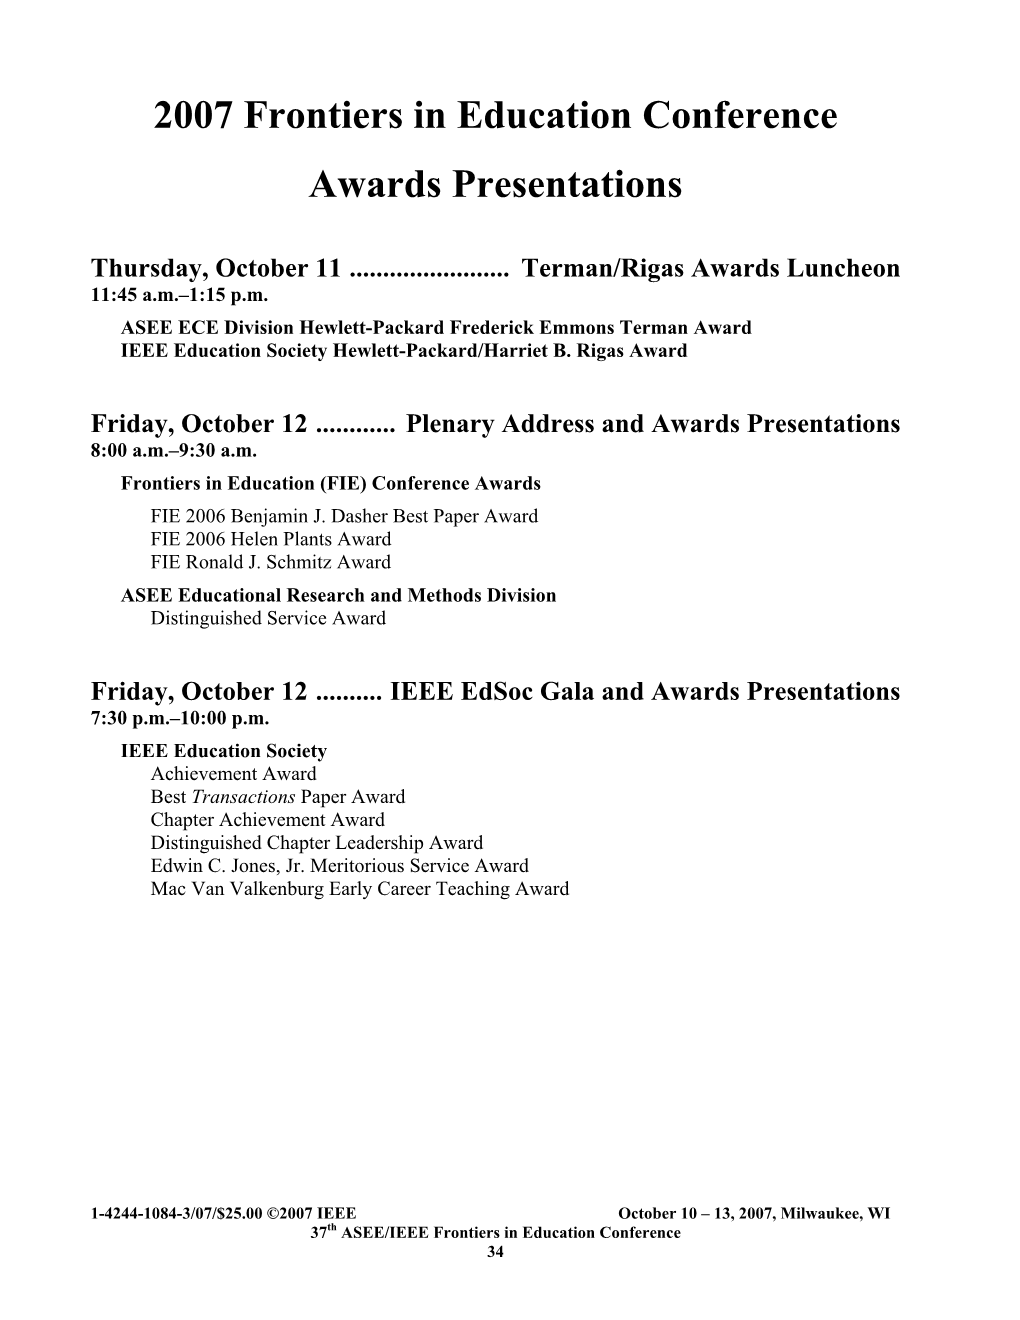 2007 Frontiers in Education Conference Awards Presentations